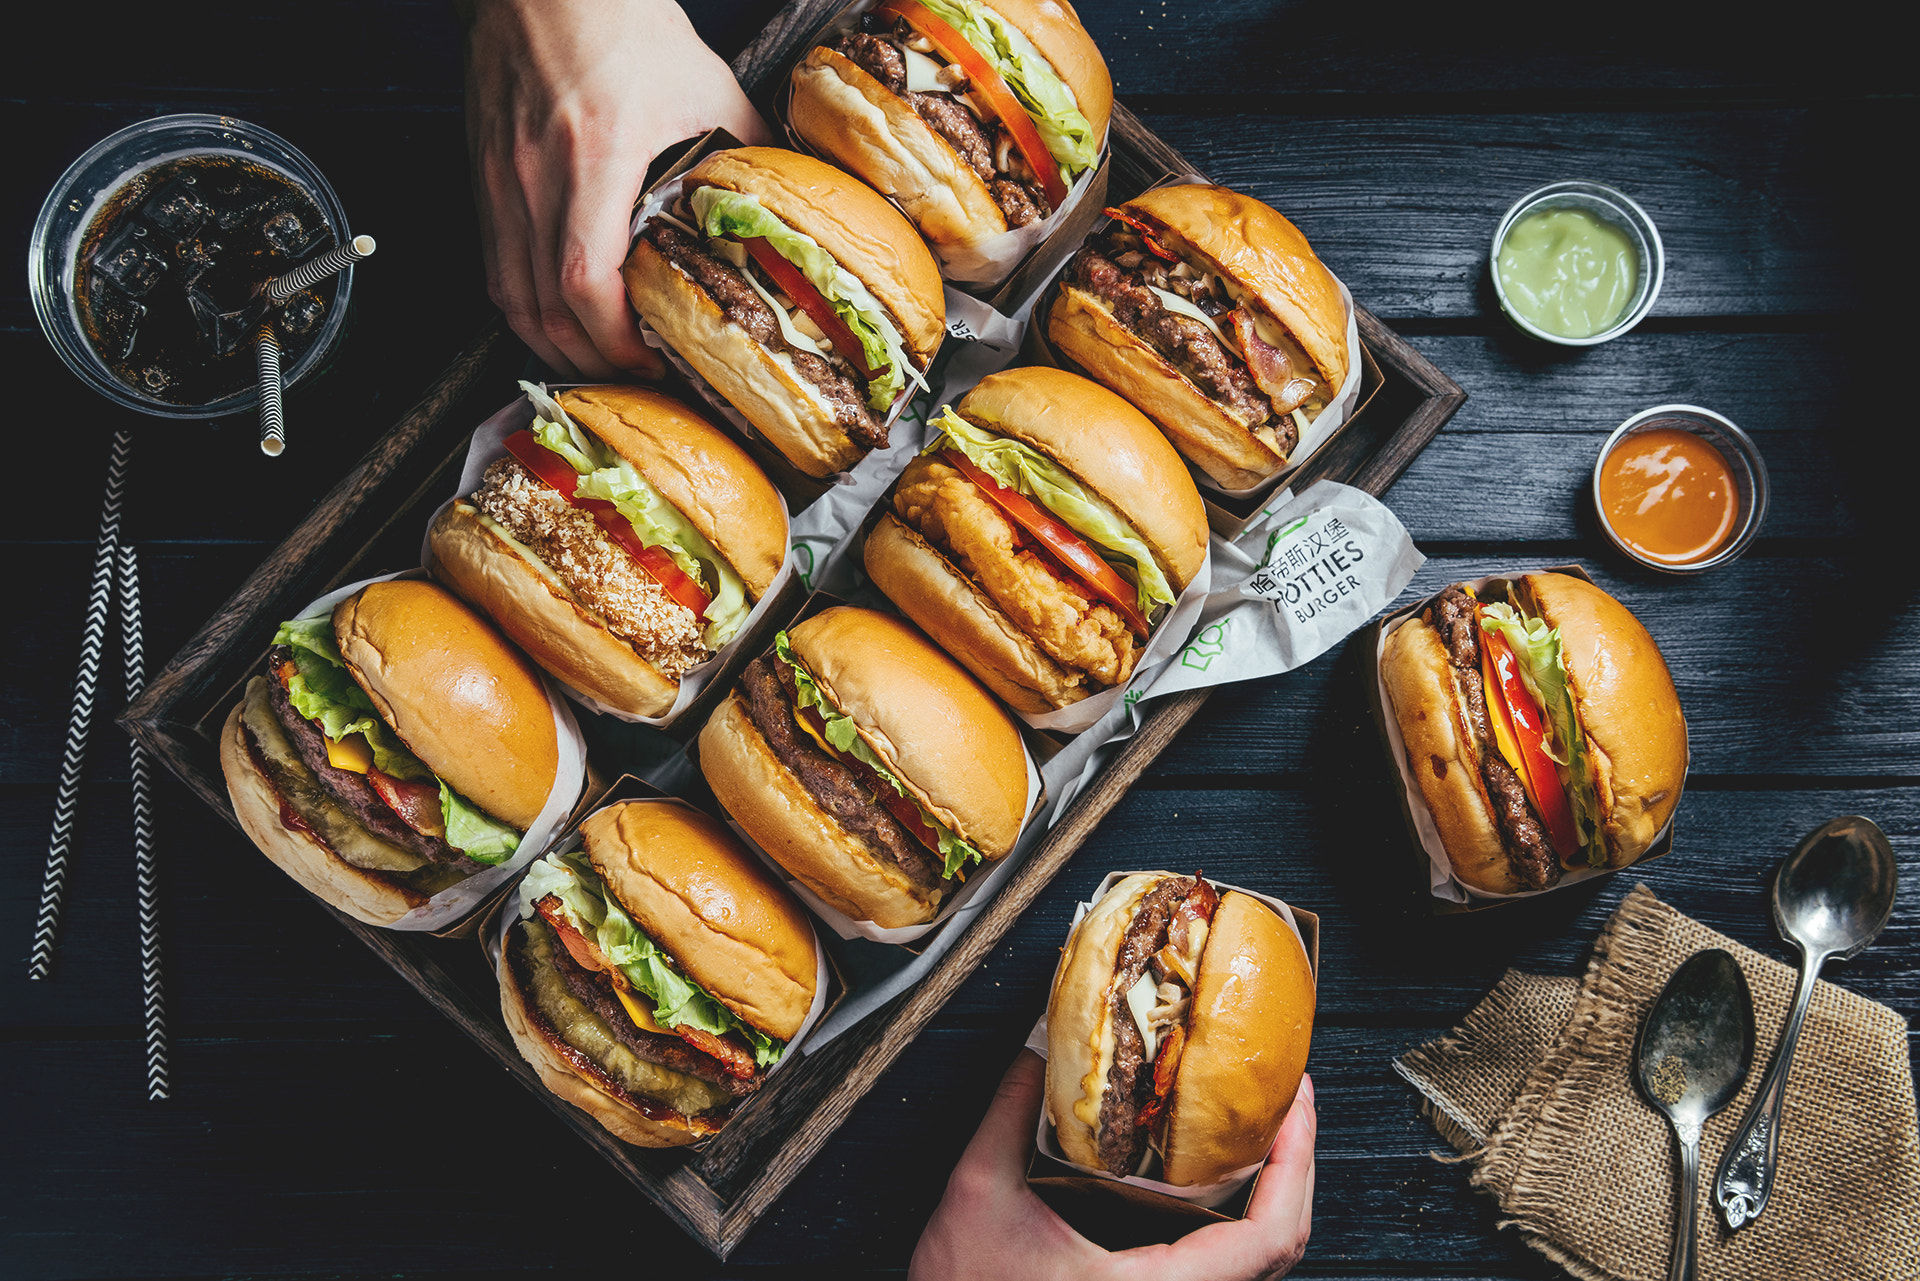 General 1920x1281 500px food meat cheese buns tomatoes bacon burgers soda